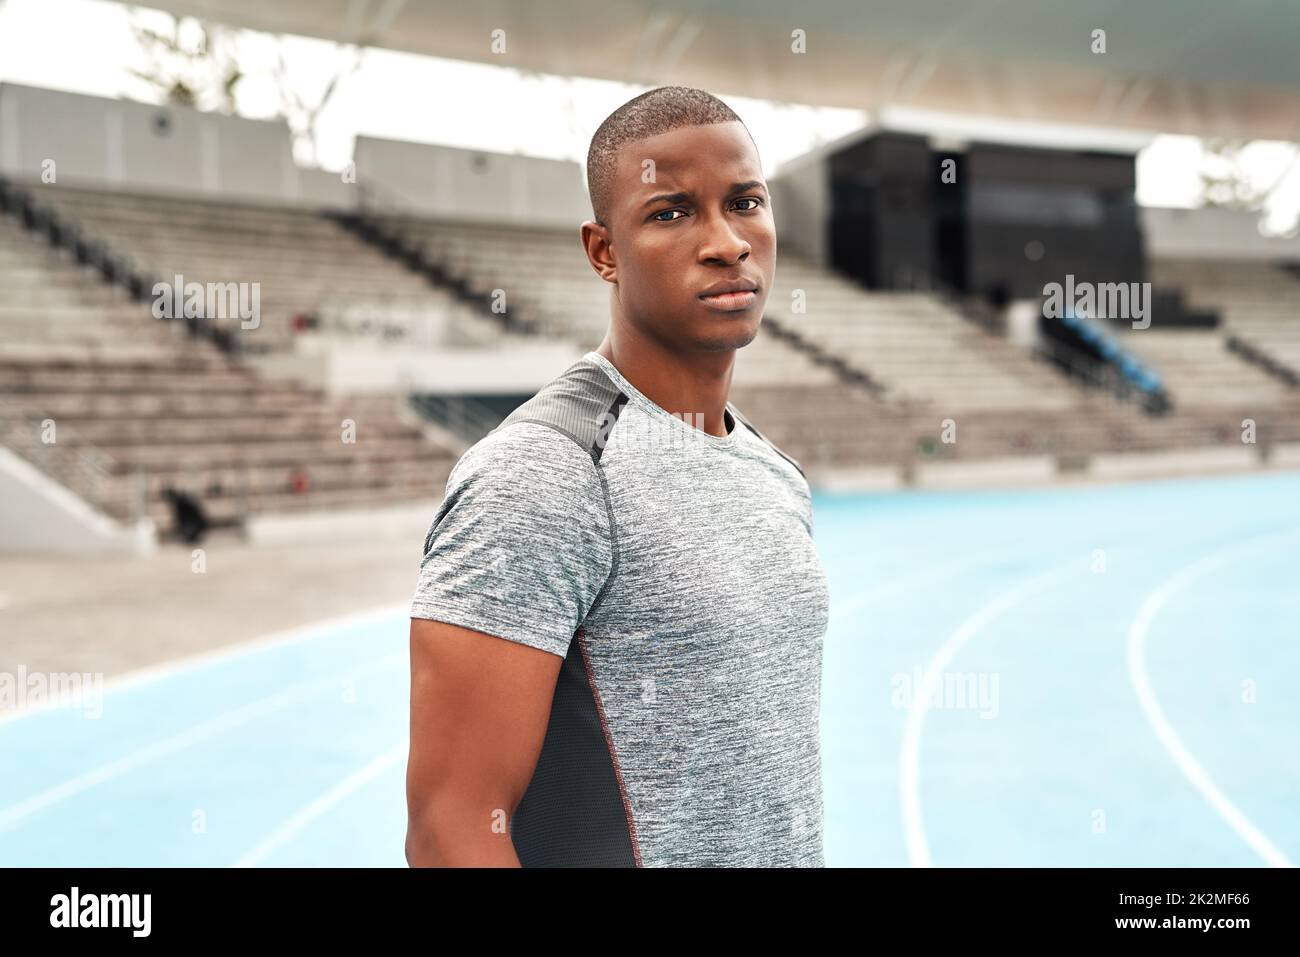 Dare to challenge me. Cropped portrait of a handsome young athlete standing alone before going for a run on a track field. Stock Photo